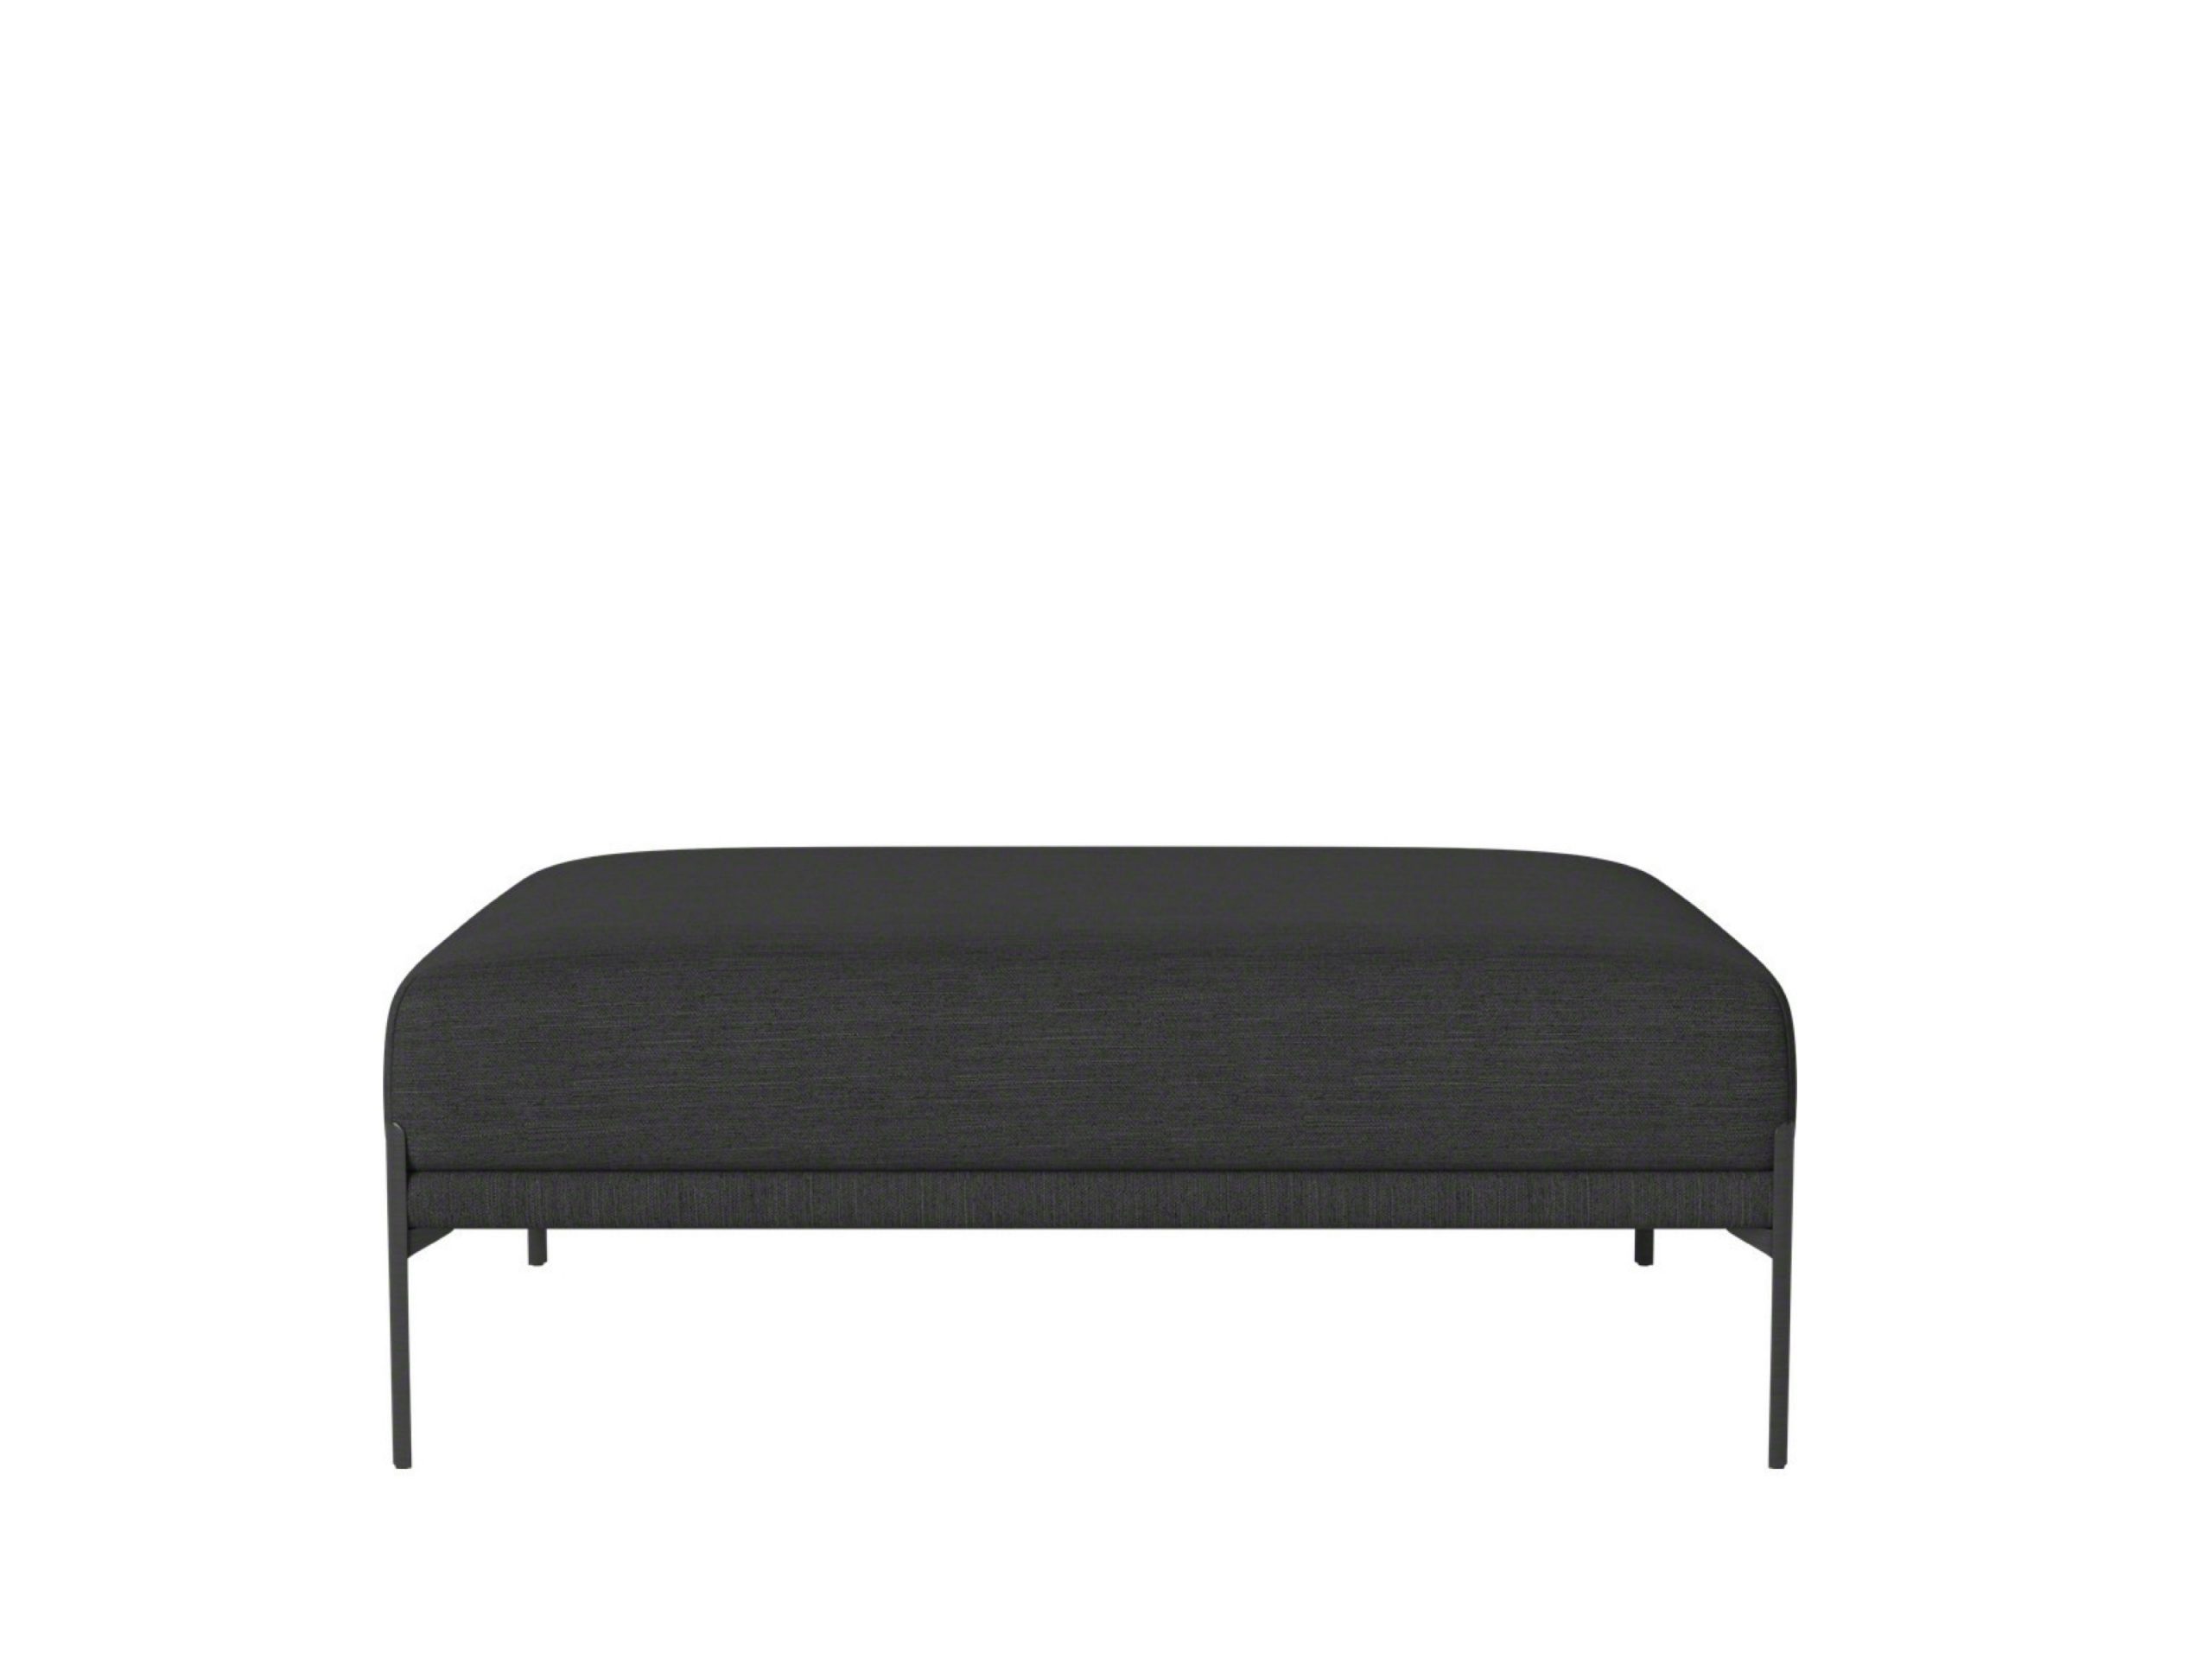 Caisa pouf - Steelcase